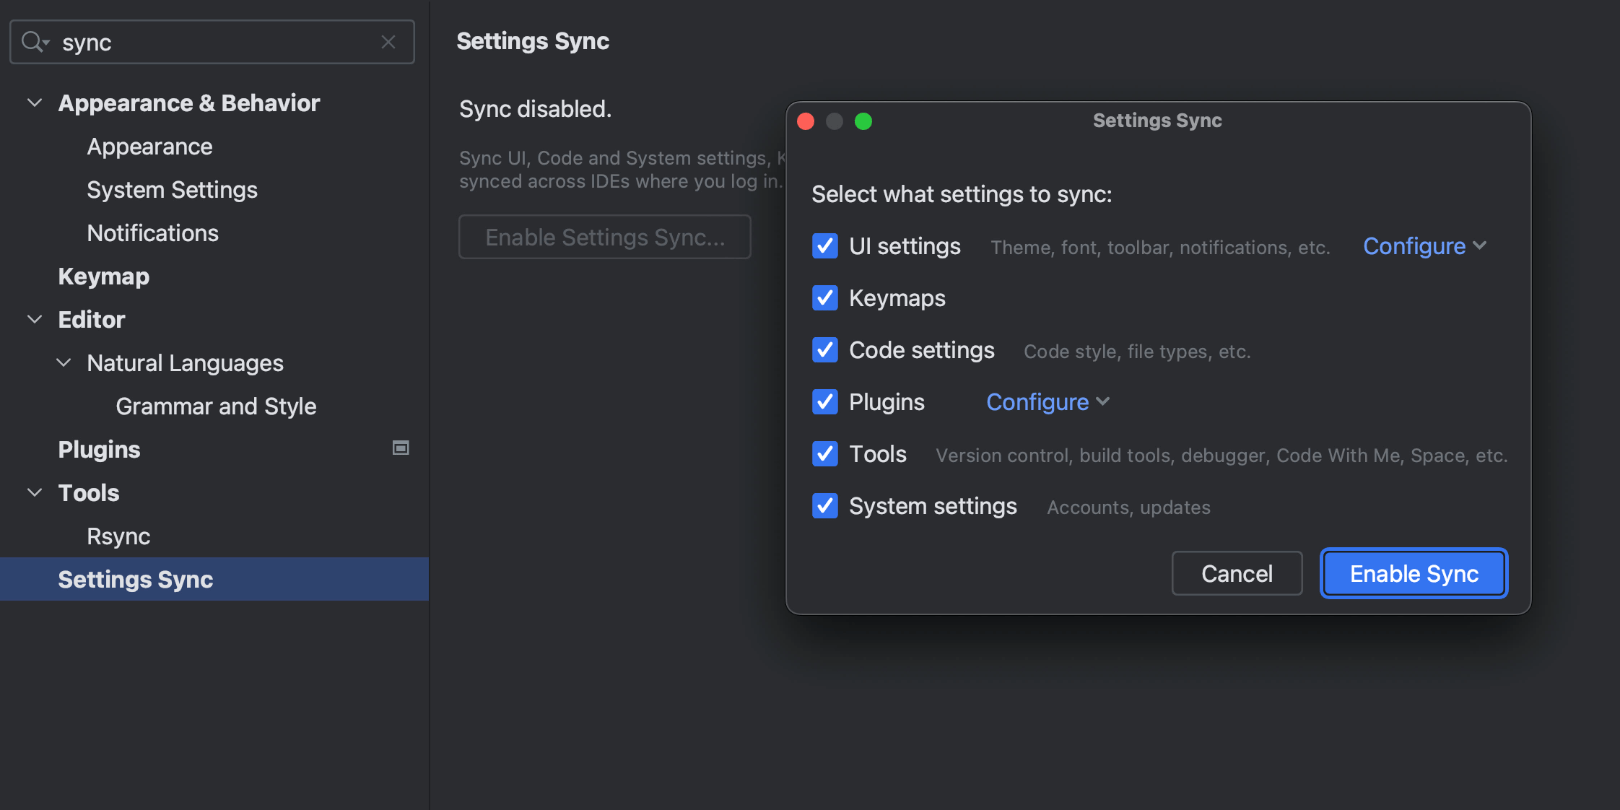 New Settings Sync solution